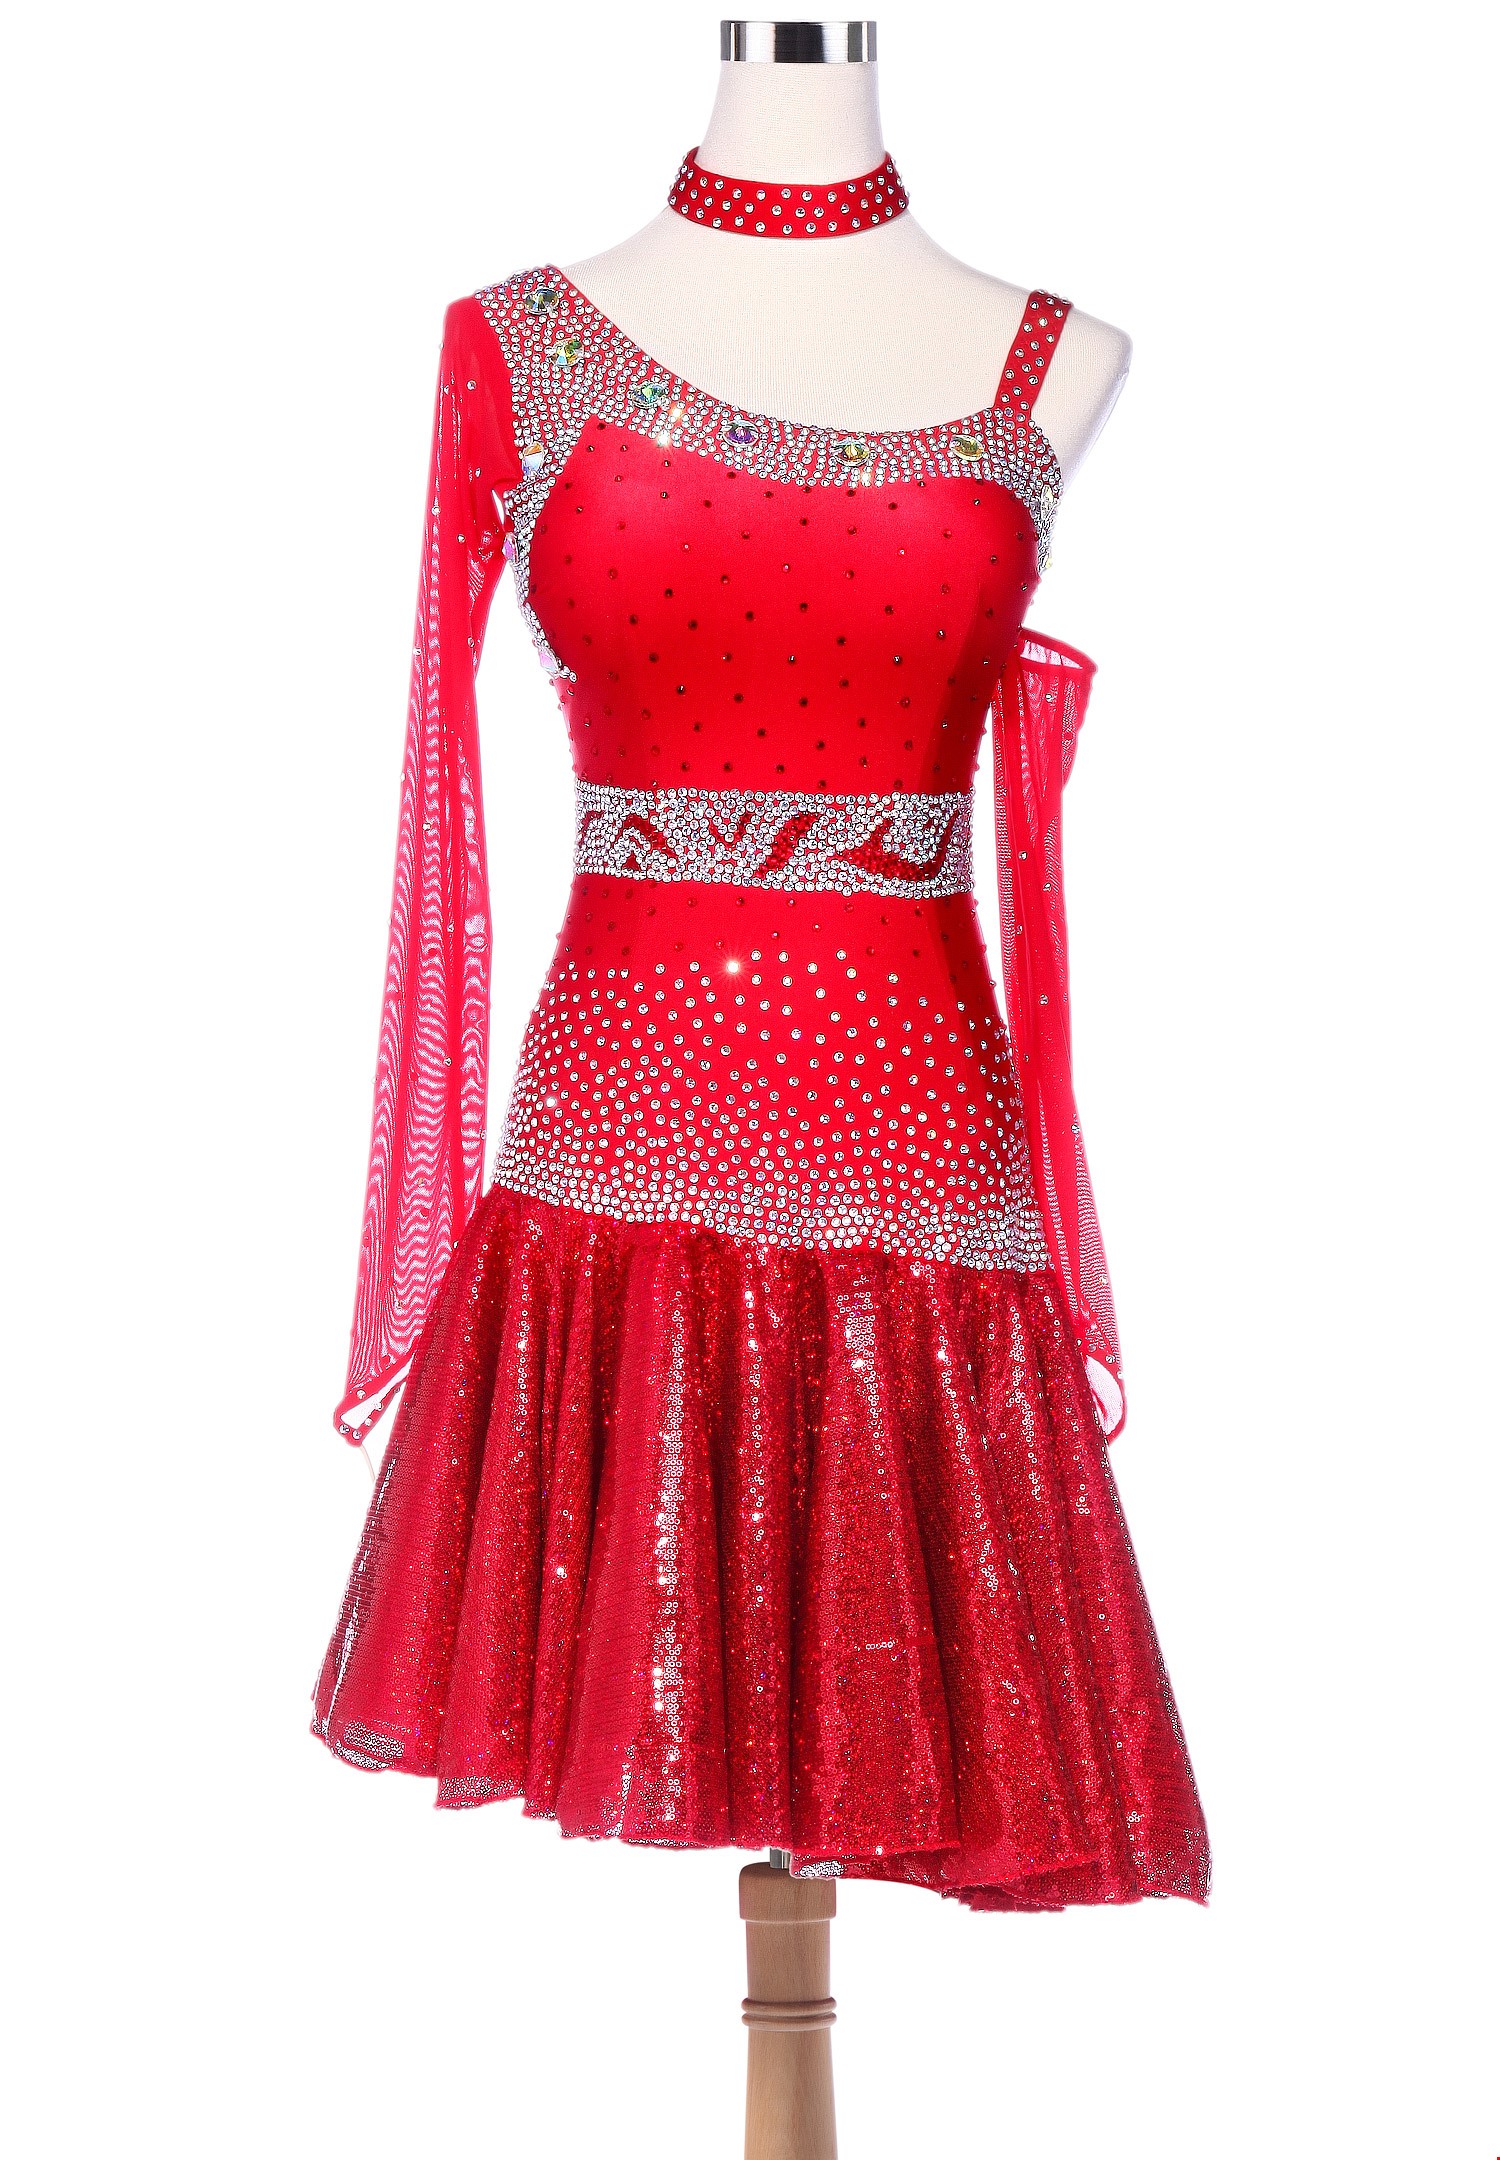 Red Latin Dance Dress With Beads and Black Lace Applique Red Rhythm Dress  L0031 -  Canada